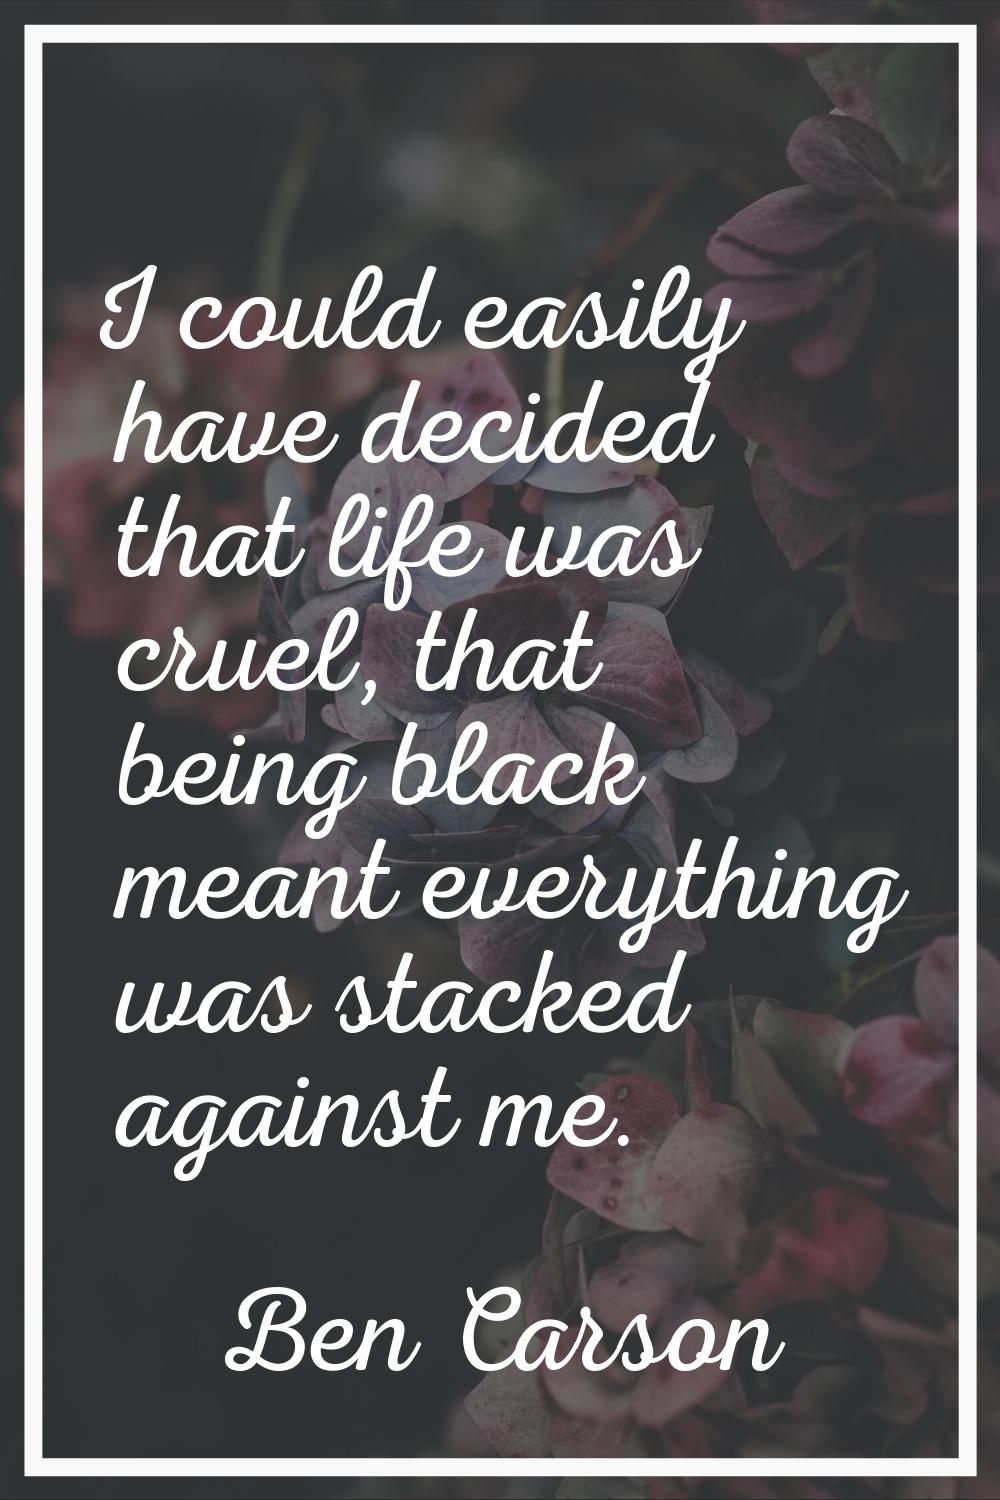 I could easily have decided that life was cruel, that being black meant everything was stacked agai